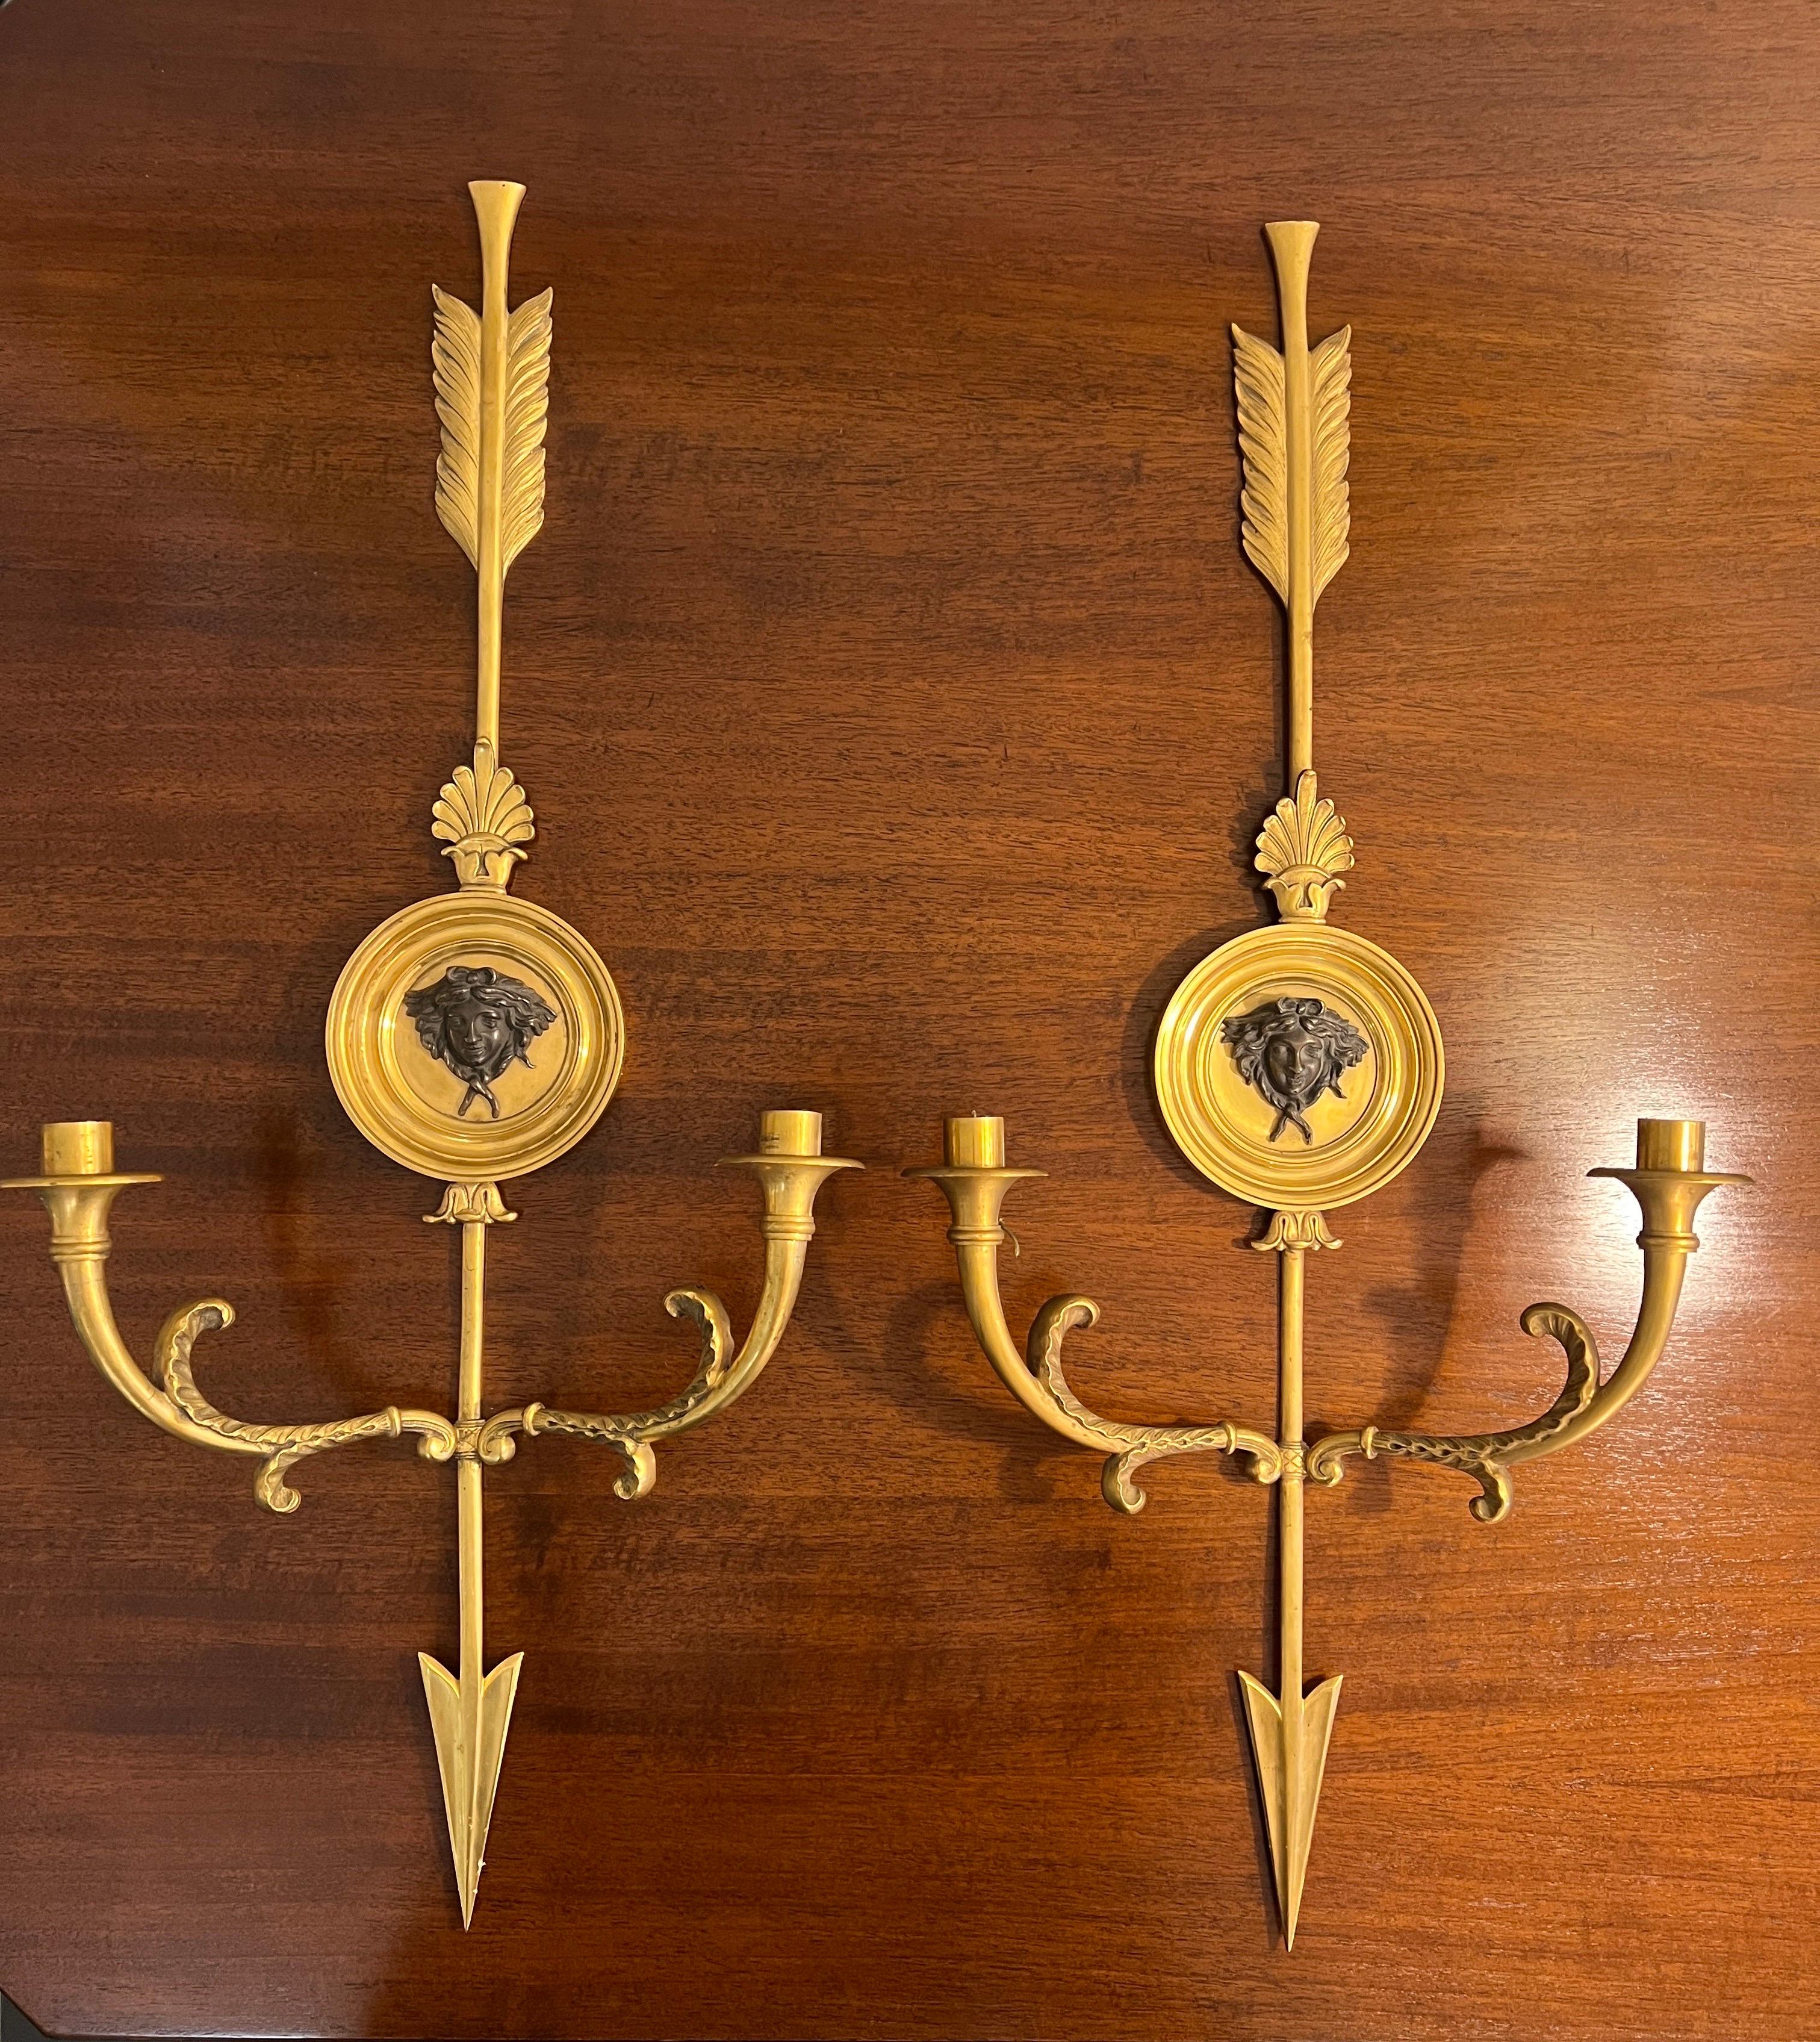 A magnificent large pair of early 20th century neoclassical ormolu arrow wall sconces. At the centre of each arrow is a decorative circular plate featuring beautifully detailed bronze relief of a woman’s face . 
The sconces are currently unwired